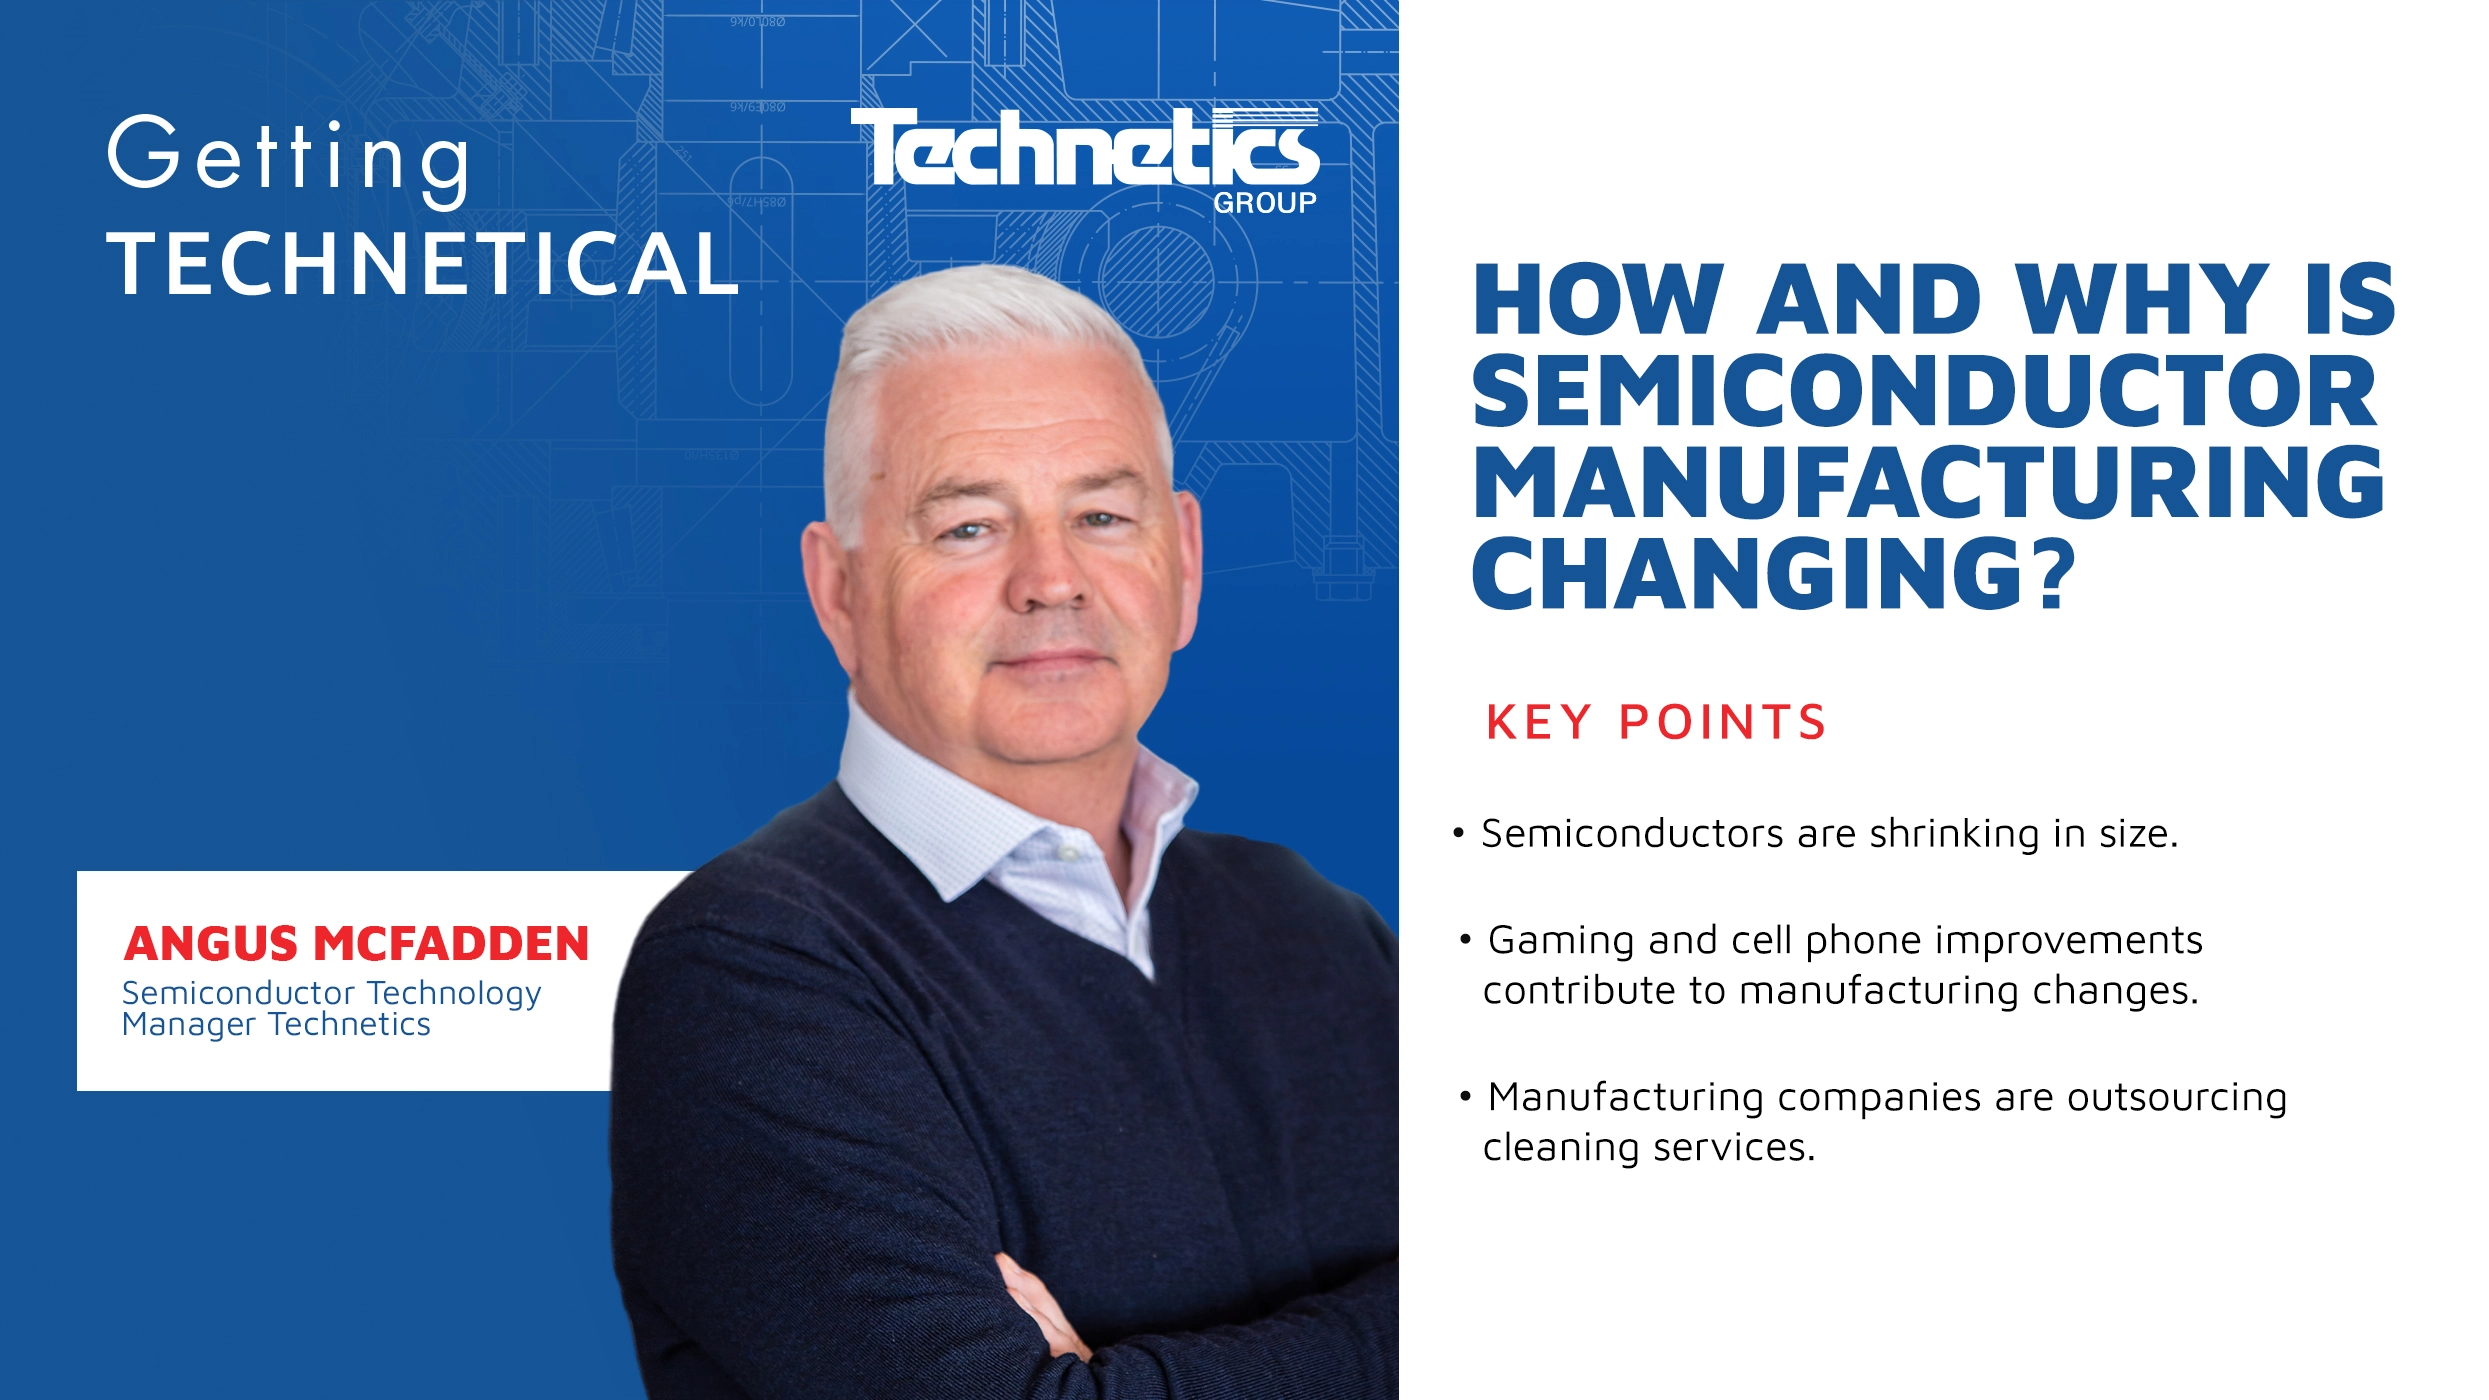 Getting Technetical with Technetics: How and Why is Semiconductor Manufacturing Changing?